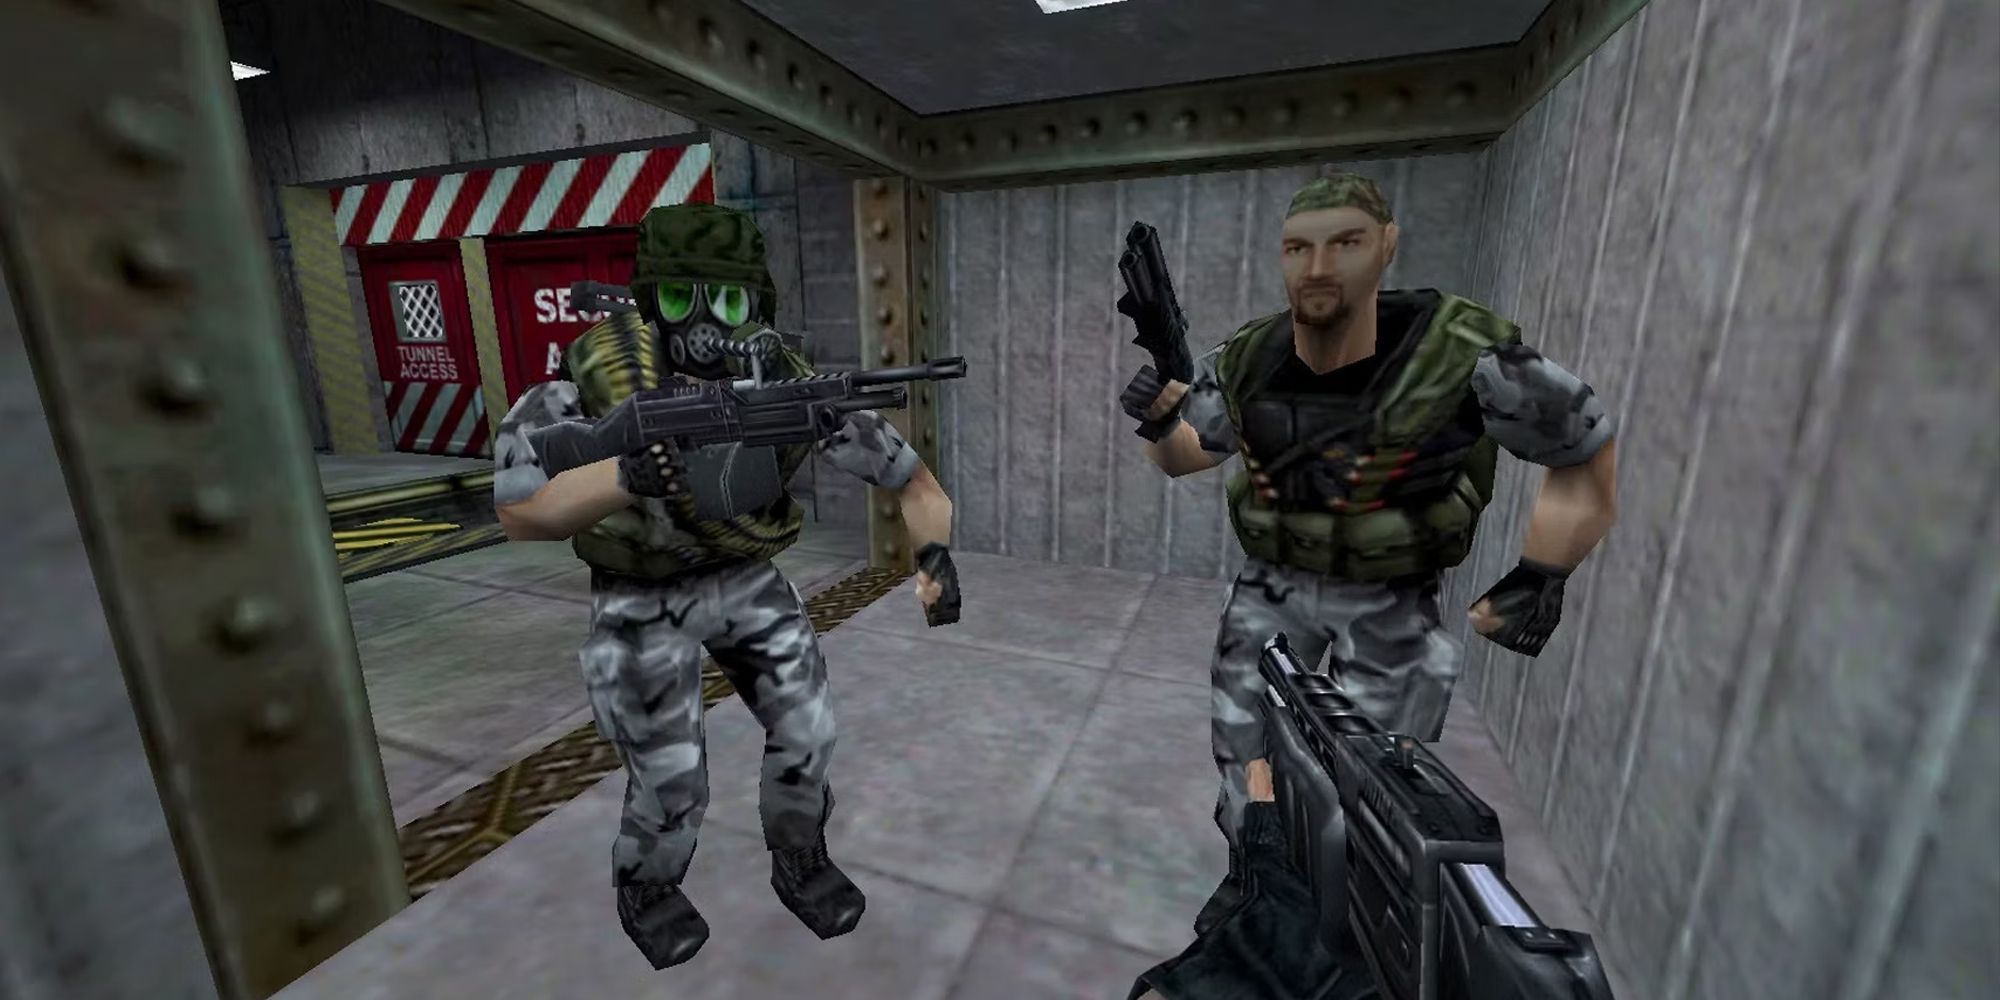 Half-Life: Opposing Force two HECU soldiers in Black Mesa while the player points a shotgun at them